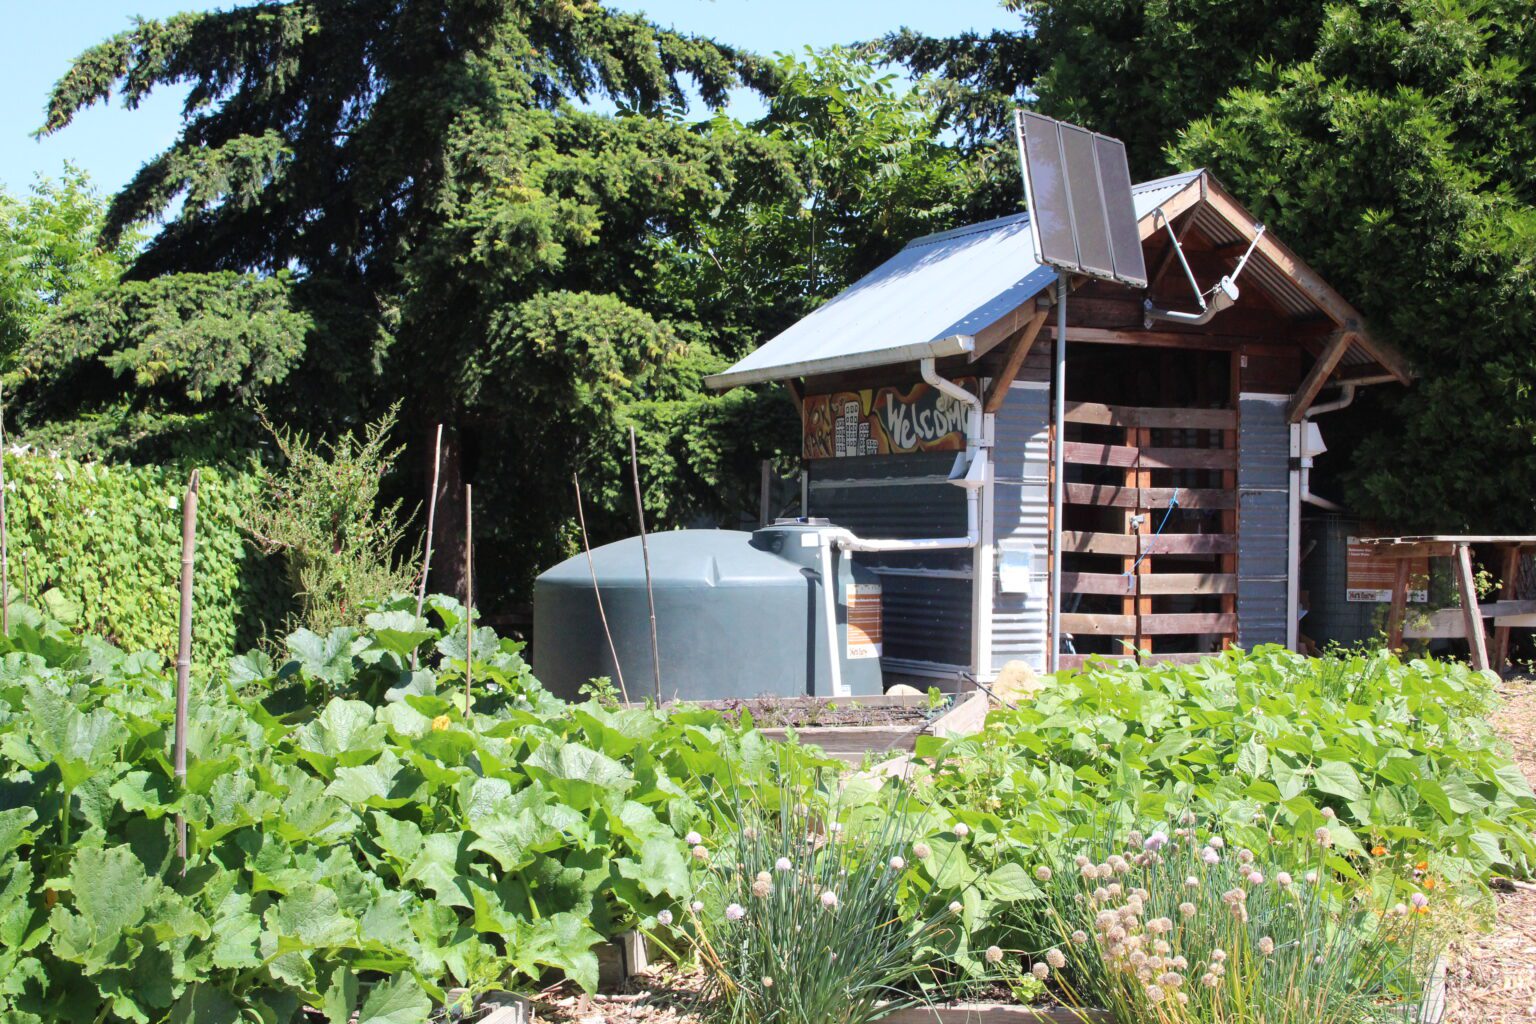 The York Community Farm began in 2013 as a way to make something useful out of a patch of abandoned grass owned by the Washington State Department of Transportation. Today the garden grows pounds of fruits and vegetables